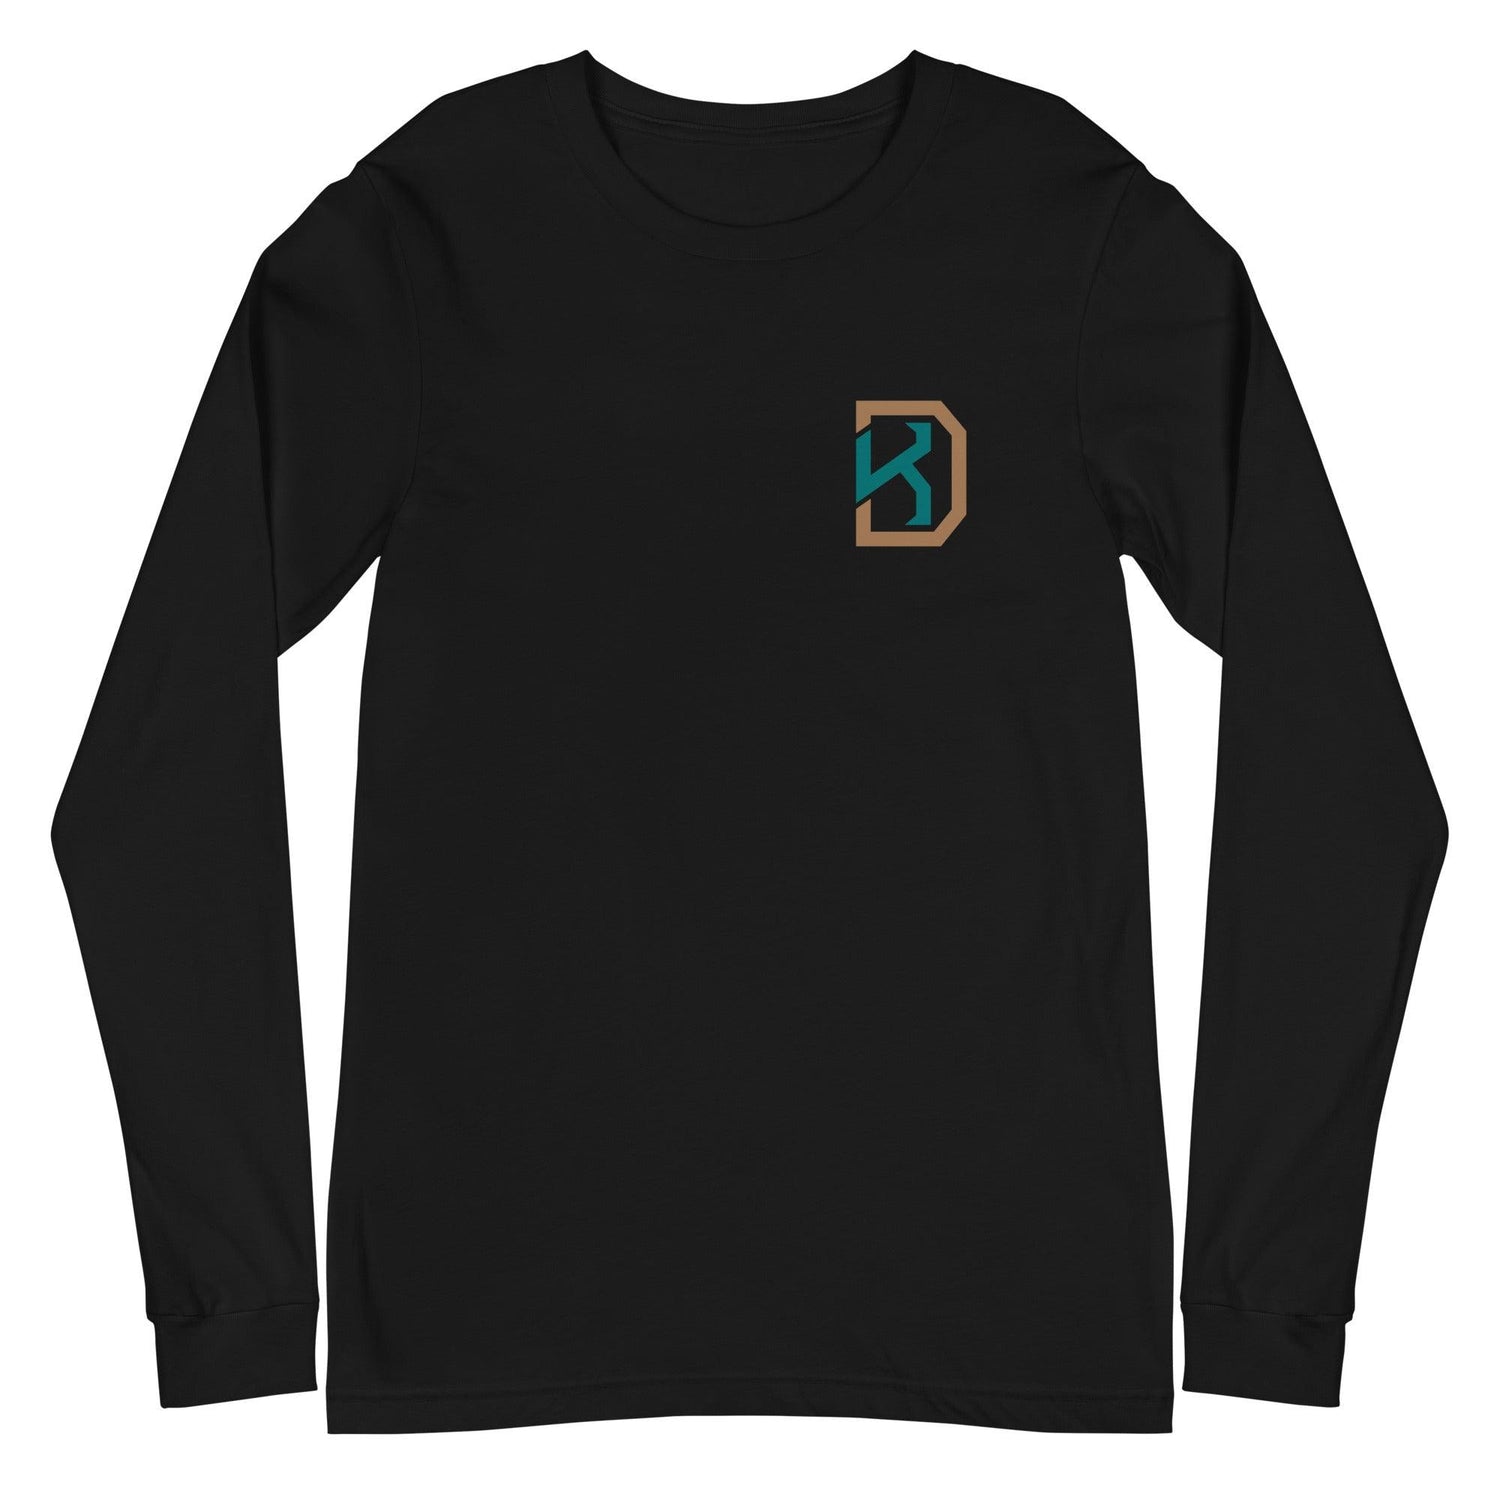 Kyre Duplessis "Essential" Long Sleeve Tee - Fan Arch